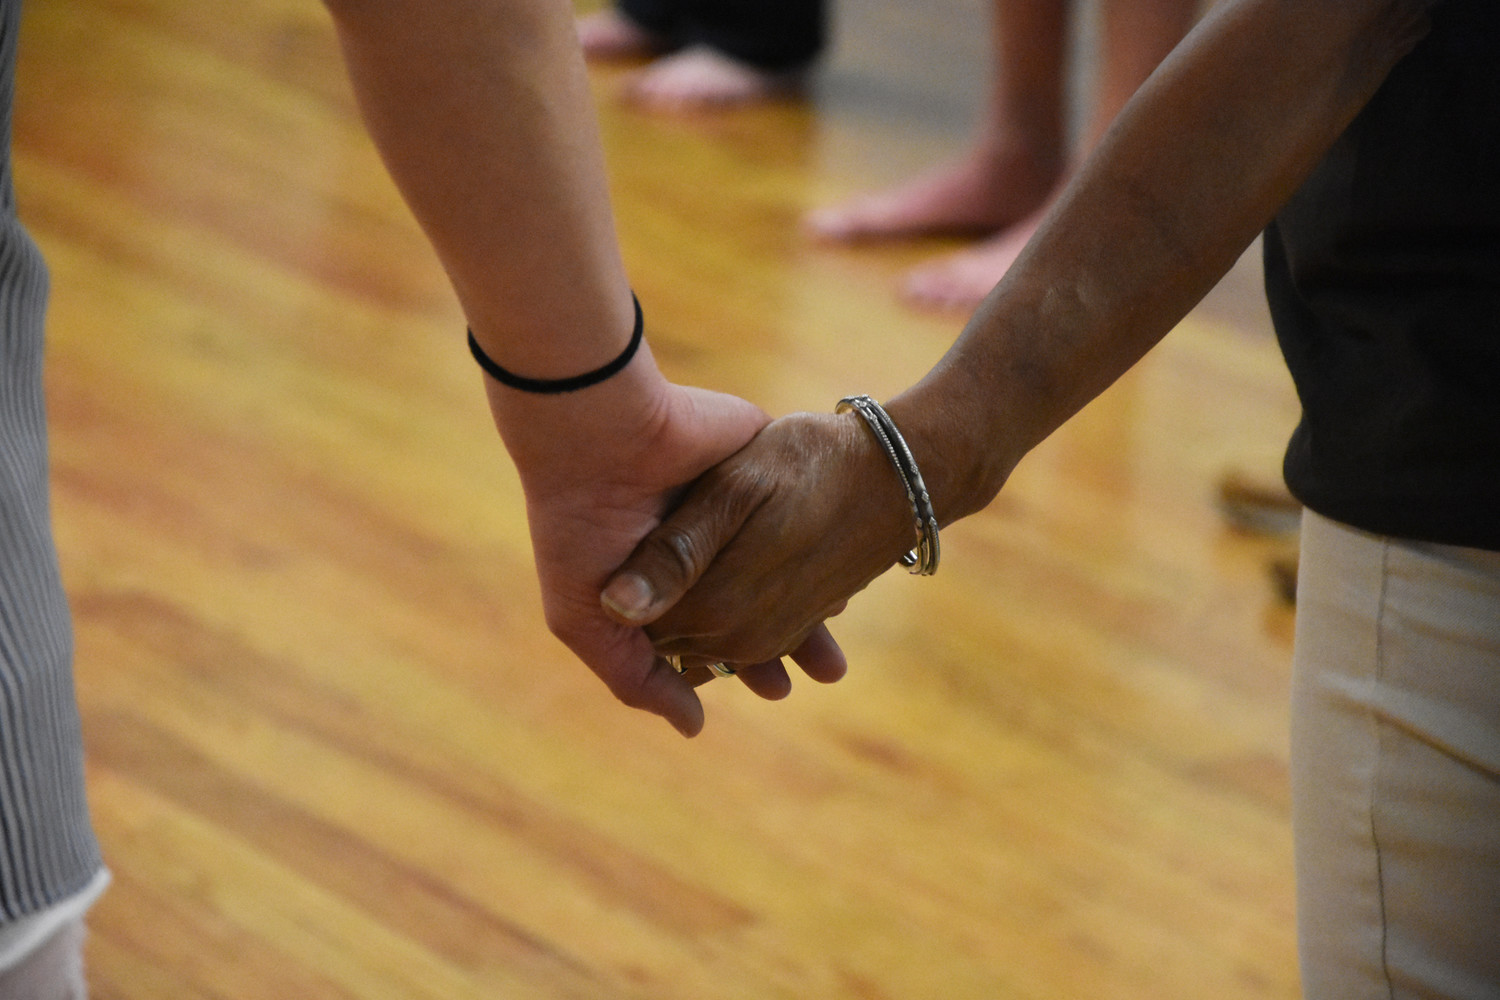 The dancers held hands with friends and strangers.